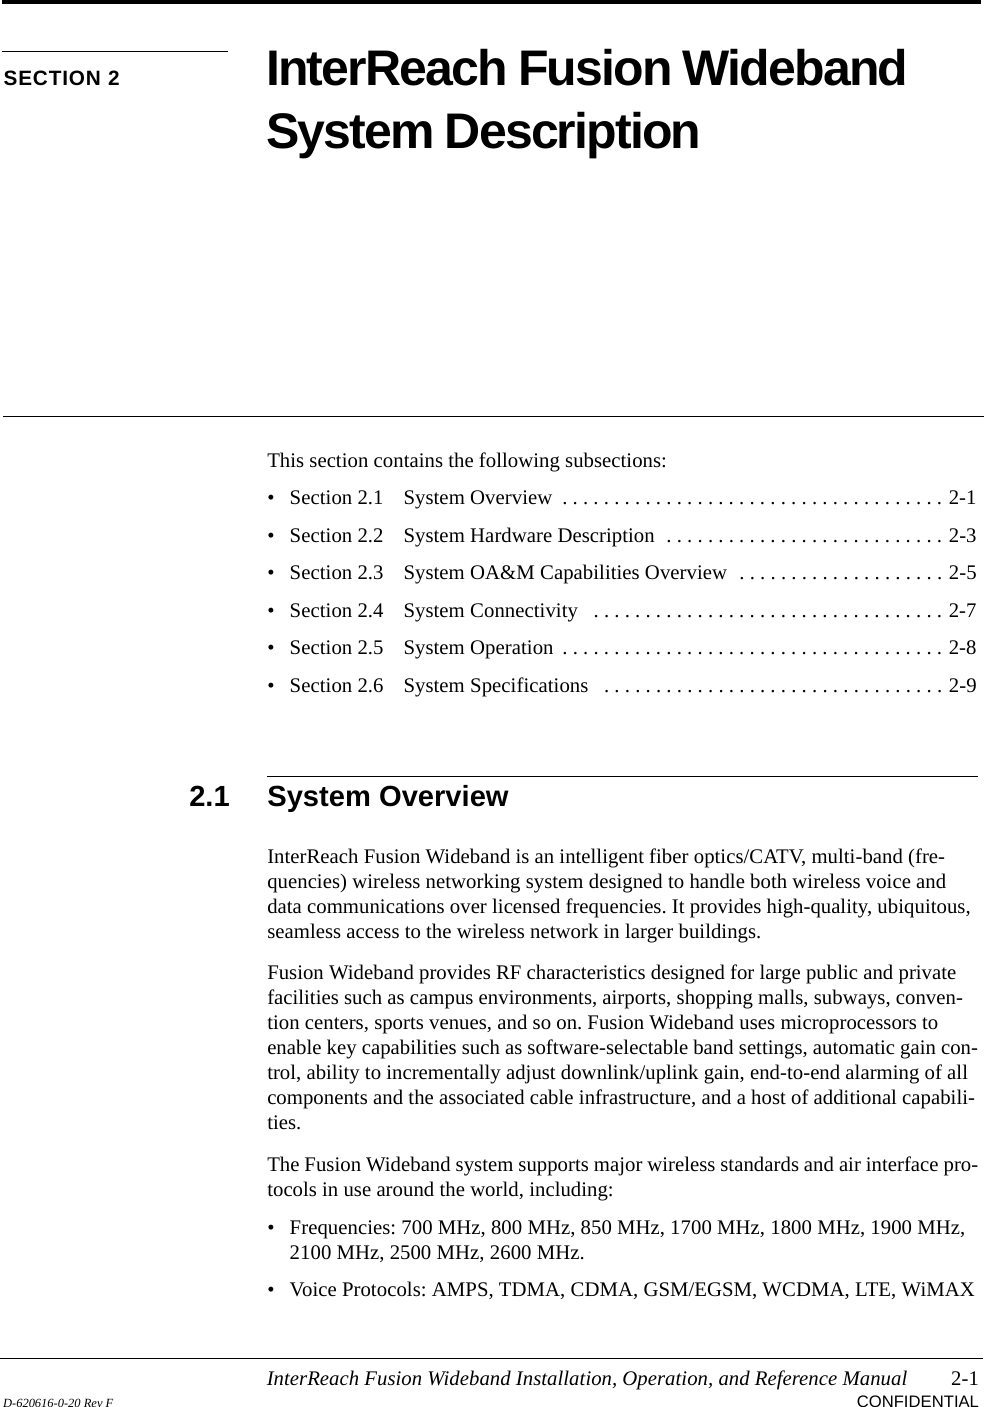 InterReach Fusion Wideband Installation, Operation, and Reference Manual 2-1D-620616-0-20 Rev F CONFIDENTIALSECTION 2 InterReach Fusion Wideband System DescriptionThis section contains the following subsections:• Section 2.1   System Overview  . . . . . . . . . . . . . . . . . . . . . . . . . . . . . . . . . . . . . 2-1• Section 2.2   System Hardware Description  . . . . . . . . . . . . . . . . . . . . . . . . . . . 2-3• Section 2.3   System OA&amp;M Capabilities Overview  . . . . . . . . . . . . . . . . . . . . 2-5• Section 2.4   System Connectivity   . . . . . . . . . . . . . . . . . . . . . . . . . . . . . . . . . . 2-7• Section 2.5   System Operation  . . . . . . . . . . . . . . . . . . . . . . . . . . . . . . . . . . . . . 2-8• Section 2.6   System Specifications   . . . . . . . . . . . . . . . . . . . . . . . . . . . . . . . . . 2-92.1 System OverviewInterReach Fusion Wideband is an intelligent fiber optics/CATV, multi-band (fre-quencies) wireless networking system designed to handle both wireless voice and data communications over licensed frequencies. It provides high-quality, ubiquitous, seamless access to the wireless network in larger buildings.Fusion Wideband provides RF characteristics designed for large public and private facilities such as campus environments, airports, shopping malls, subways, conven-tion centers, sports venues, and so on. Fusion Wideband uses microprocessors to enable key capabilities such as software-selectable band settings, automatic gain con-trol, ability to incrementally adjust downlink/uplink gain, end-to-end alarming of all components and the associated cable infrastructure, and a host of additional capabili-ties.The Fusion Wideband system supports major wireless standards and air interface pro-tocols in use around the world, including:• Frequencies: 700 MHz, 800 MHz, 850 MHz, 1700 MHz, 1800 MHz, 1900 MHz, 2100 MHz, 2500 MHz, 2600 MHz.• Voice Protocols: AMPS, TDMA, CDMA, GSM/EGSM, WCDMA, LTE, WiMAX